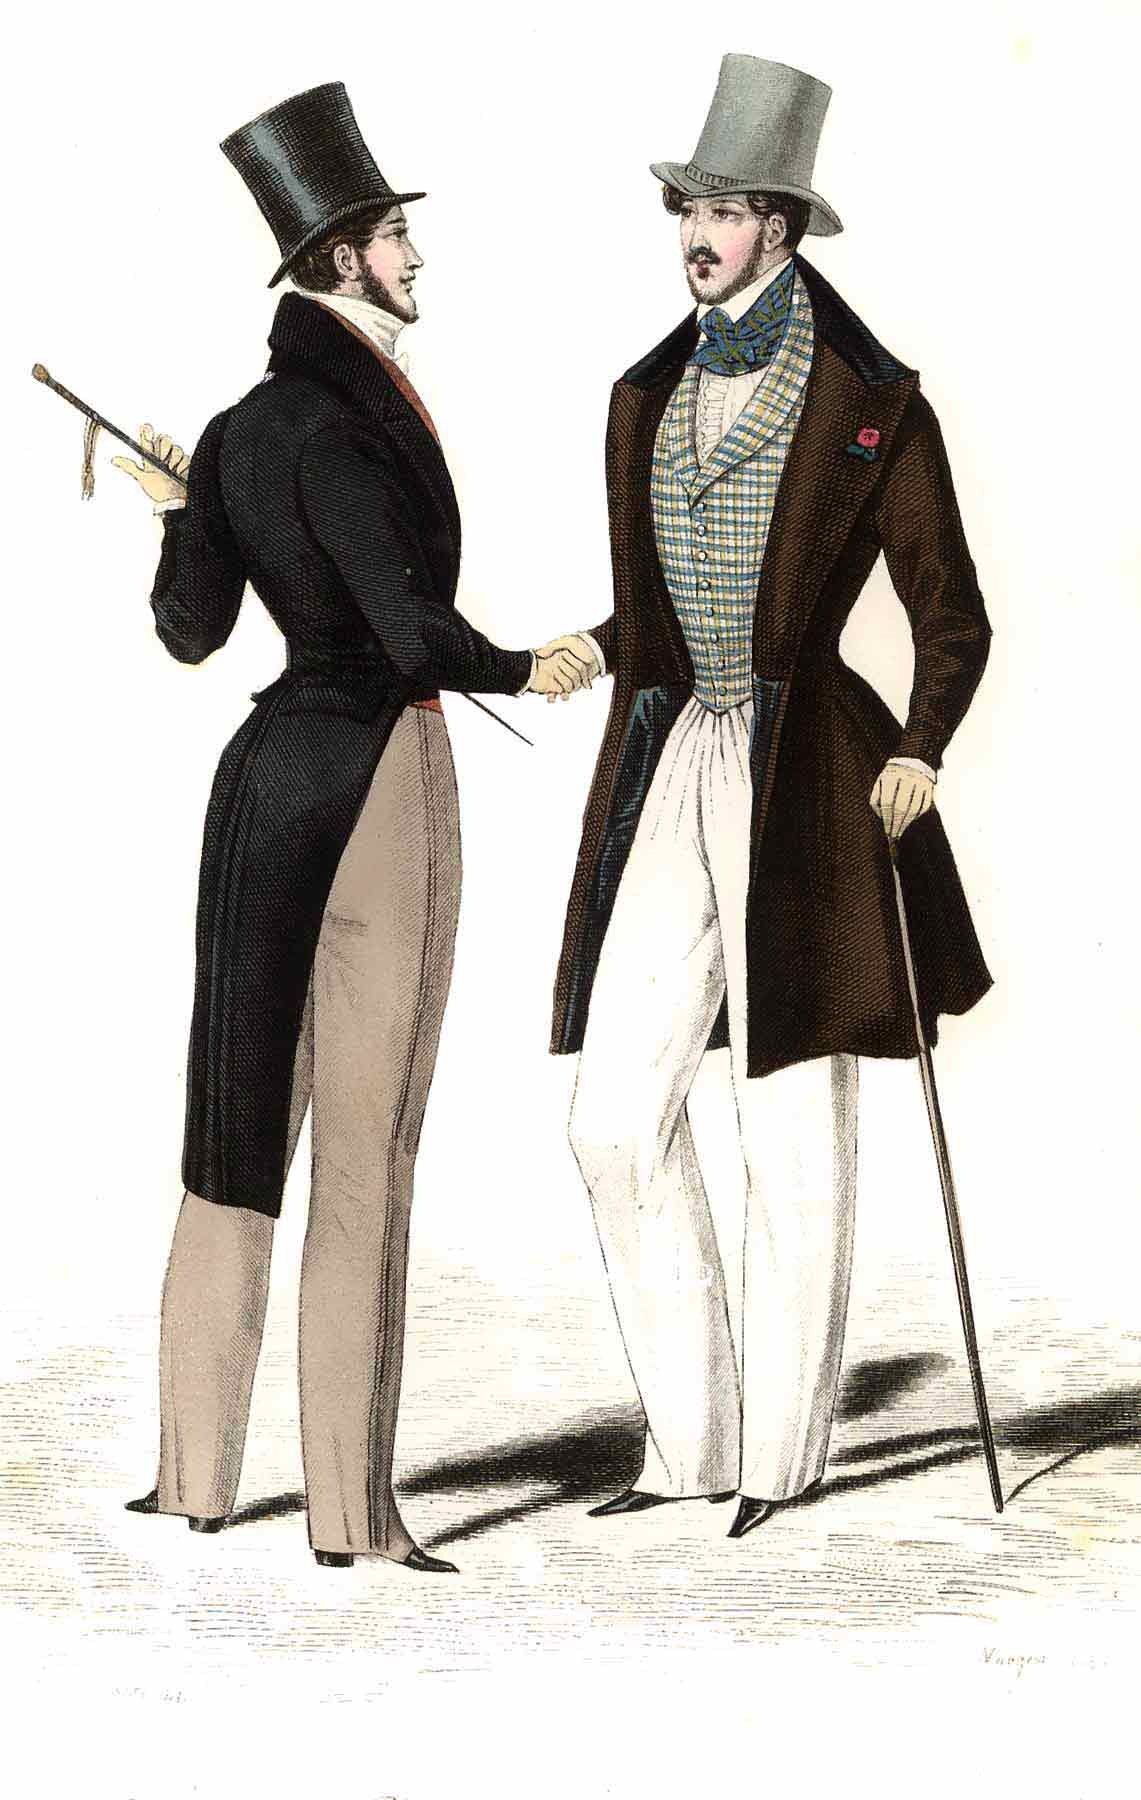 Sahib fashions in India, adopted from England despite the heat. 1834 styles.